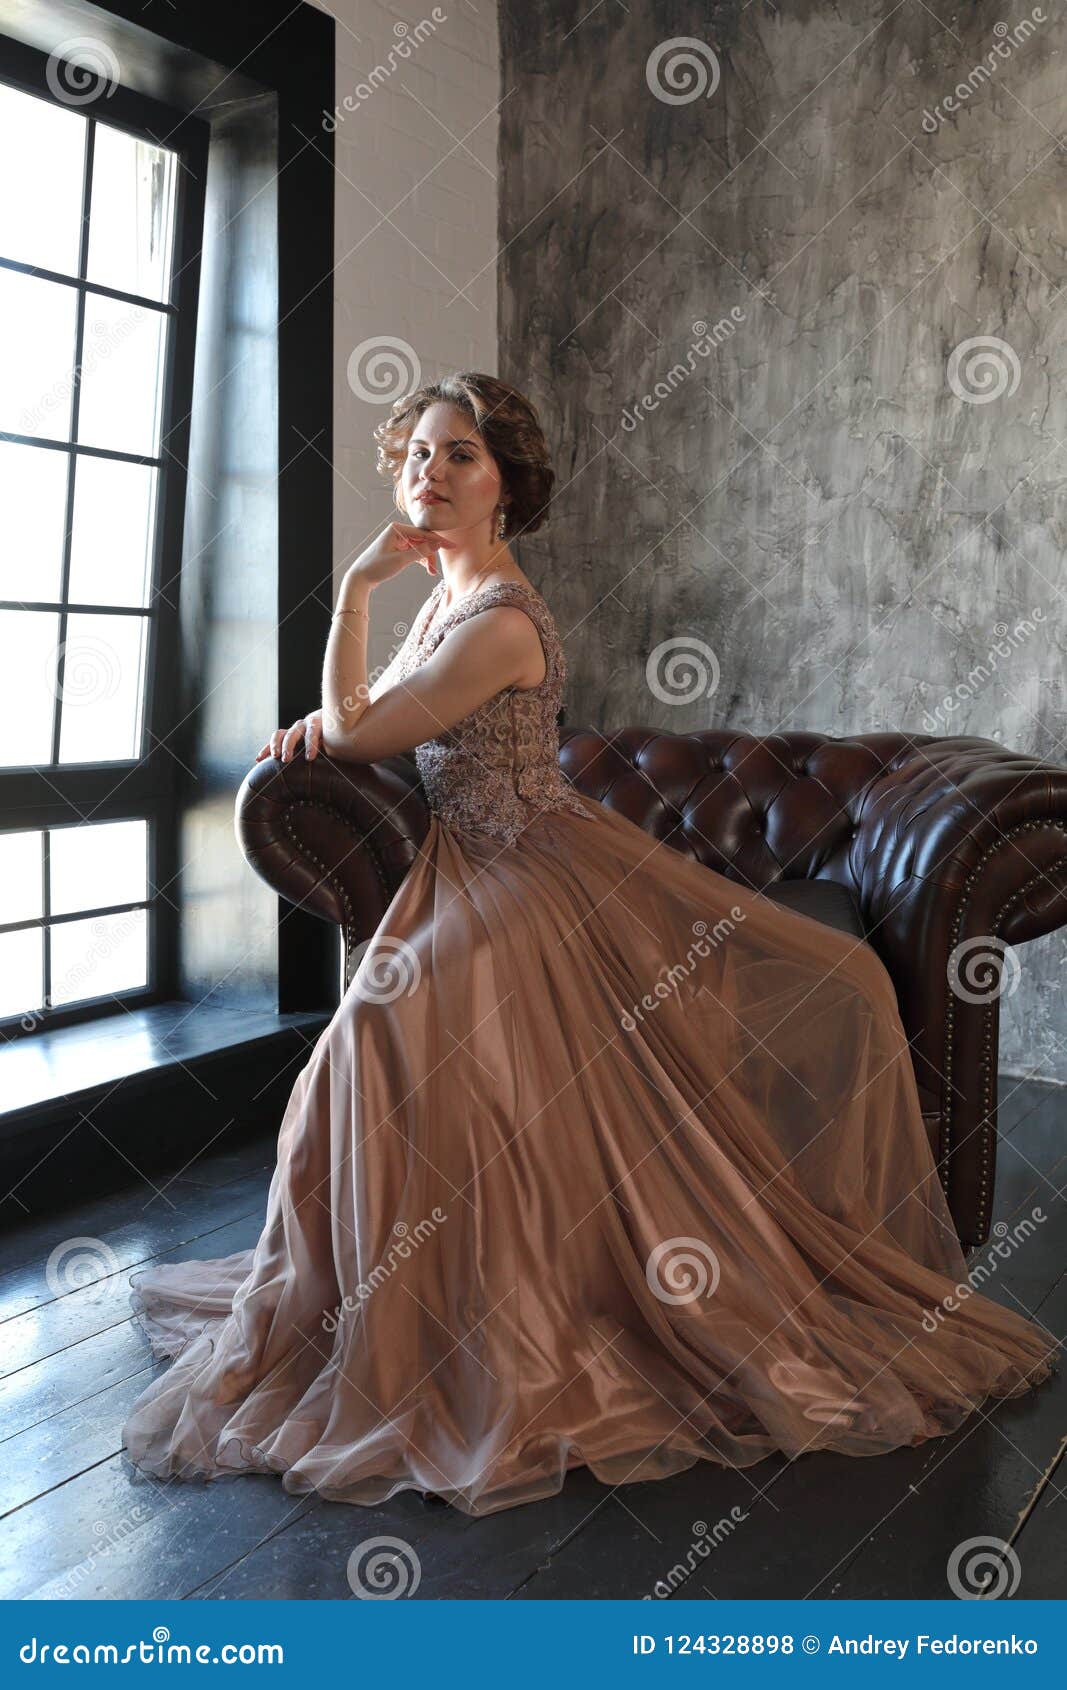 Dress Pose Stock Photos and Images - 123RF